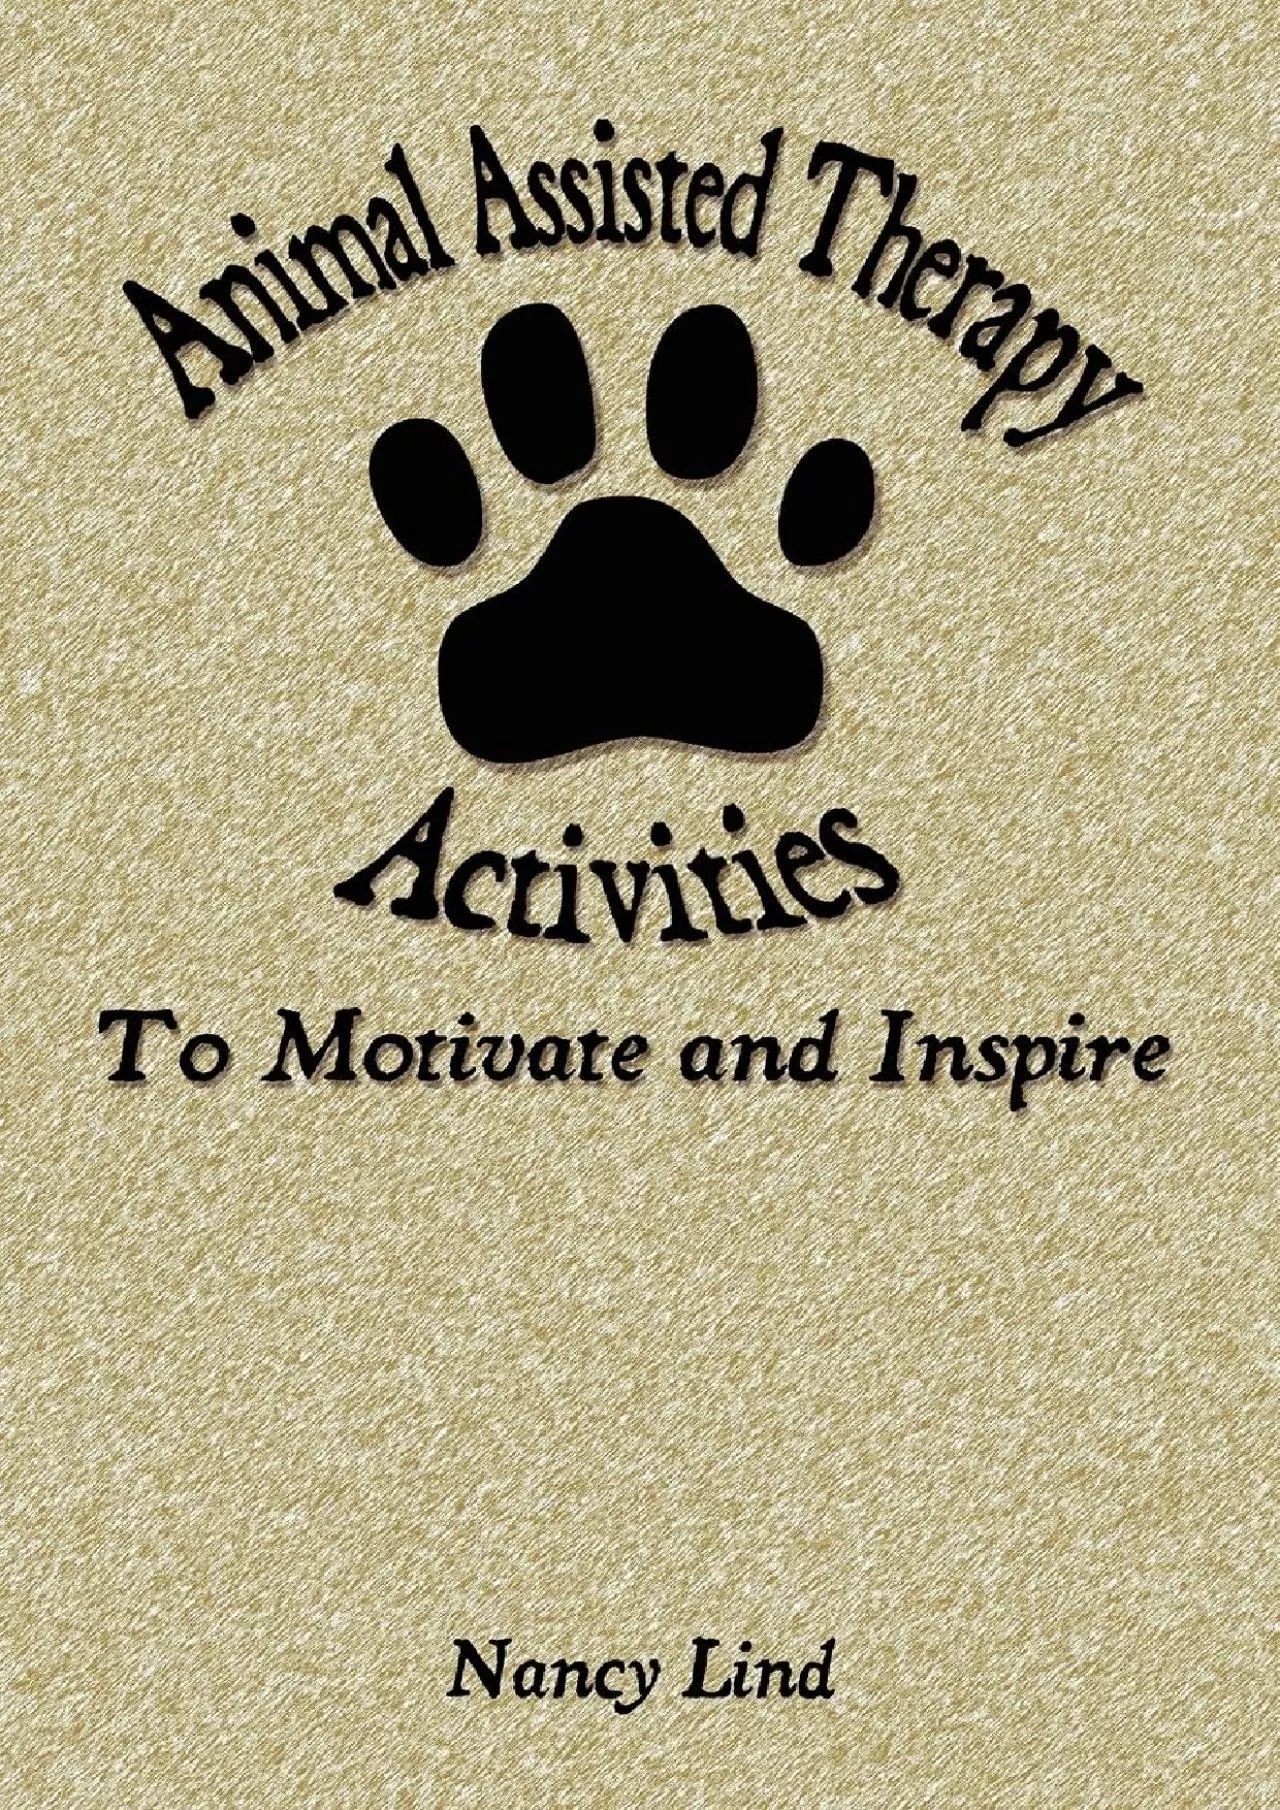 (DOWNLOAD)-Animal Assisted Therapy Activities to Motivate and Inspire